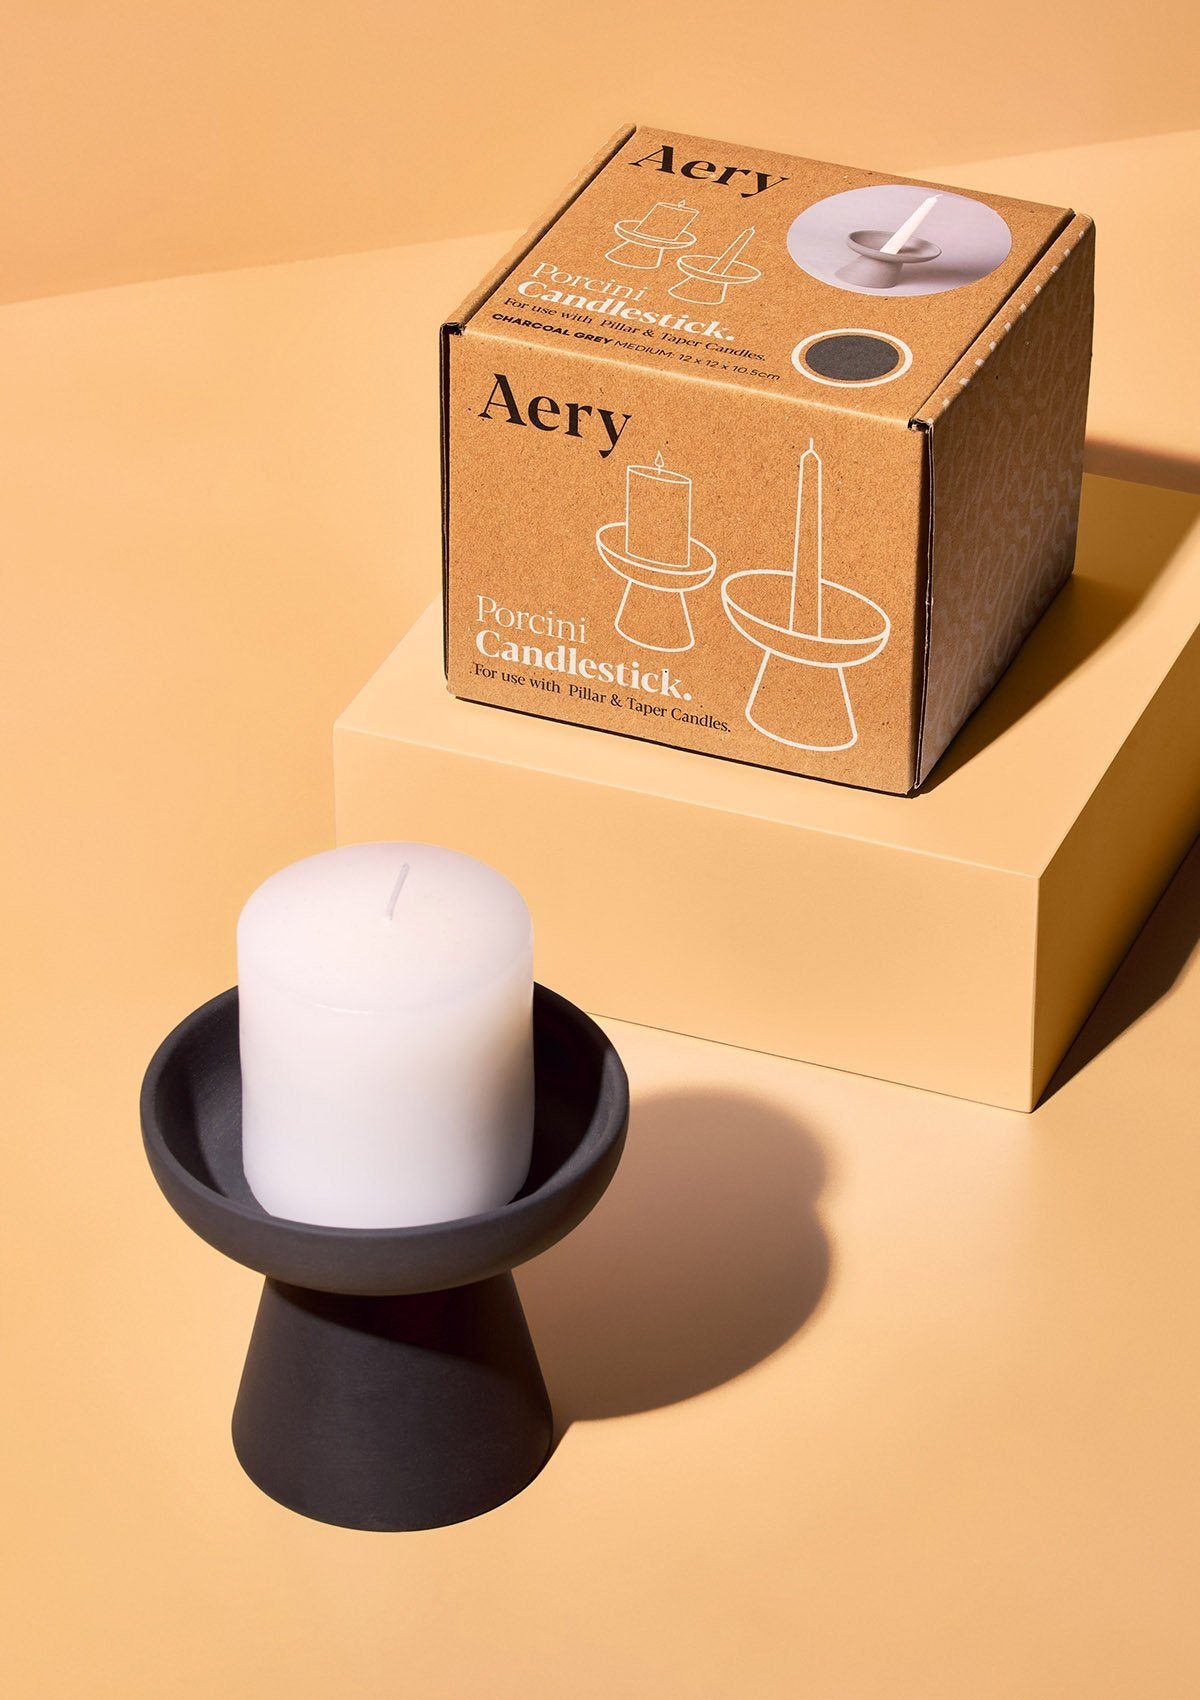 aery living charcoal grey ceramic candle holder displayed with white pillar candle and product packaging against a white backround